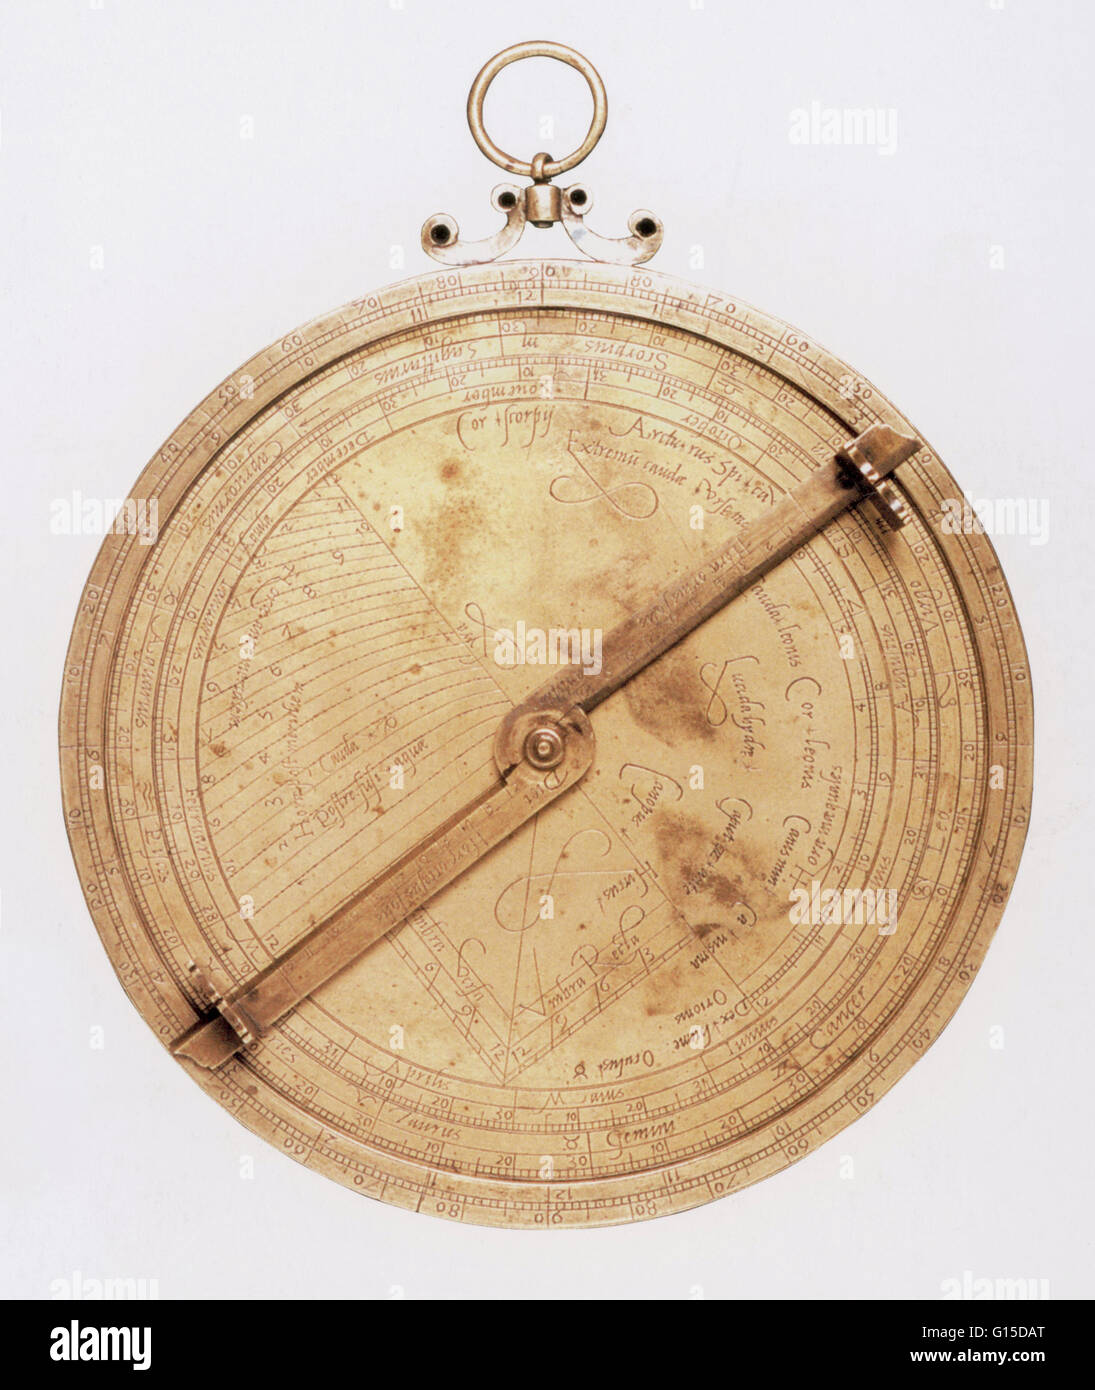 Astrolabe of Michel Piquer (1542-1580). The astrolabe is an early time-telling instrument used to calculate the positions of the sun and stars in the sky at a given moment and location. Developed in the Islamic world, the astrolabe was used to determine p Stock Photo